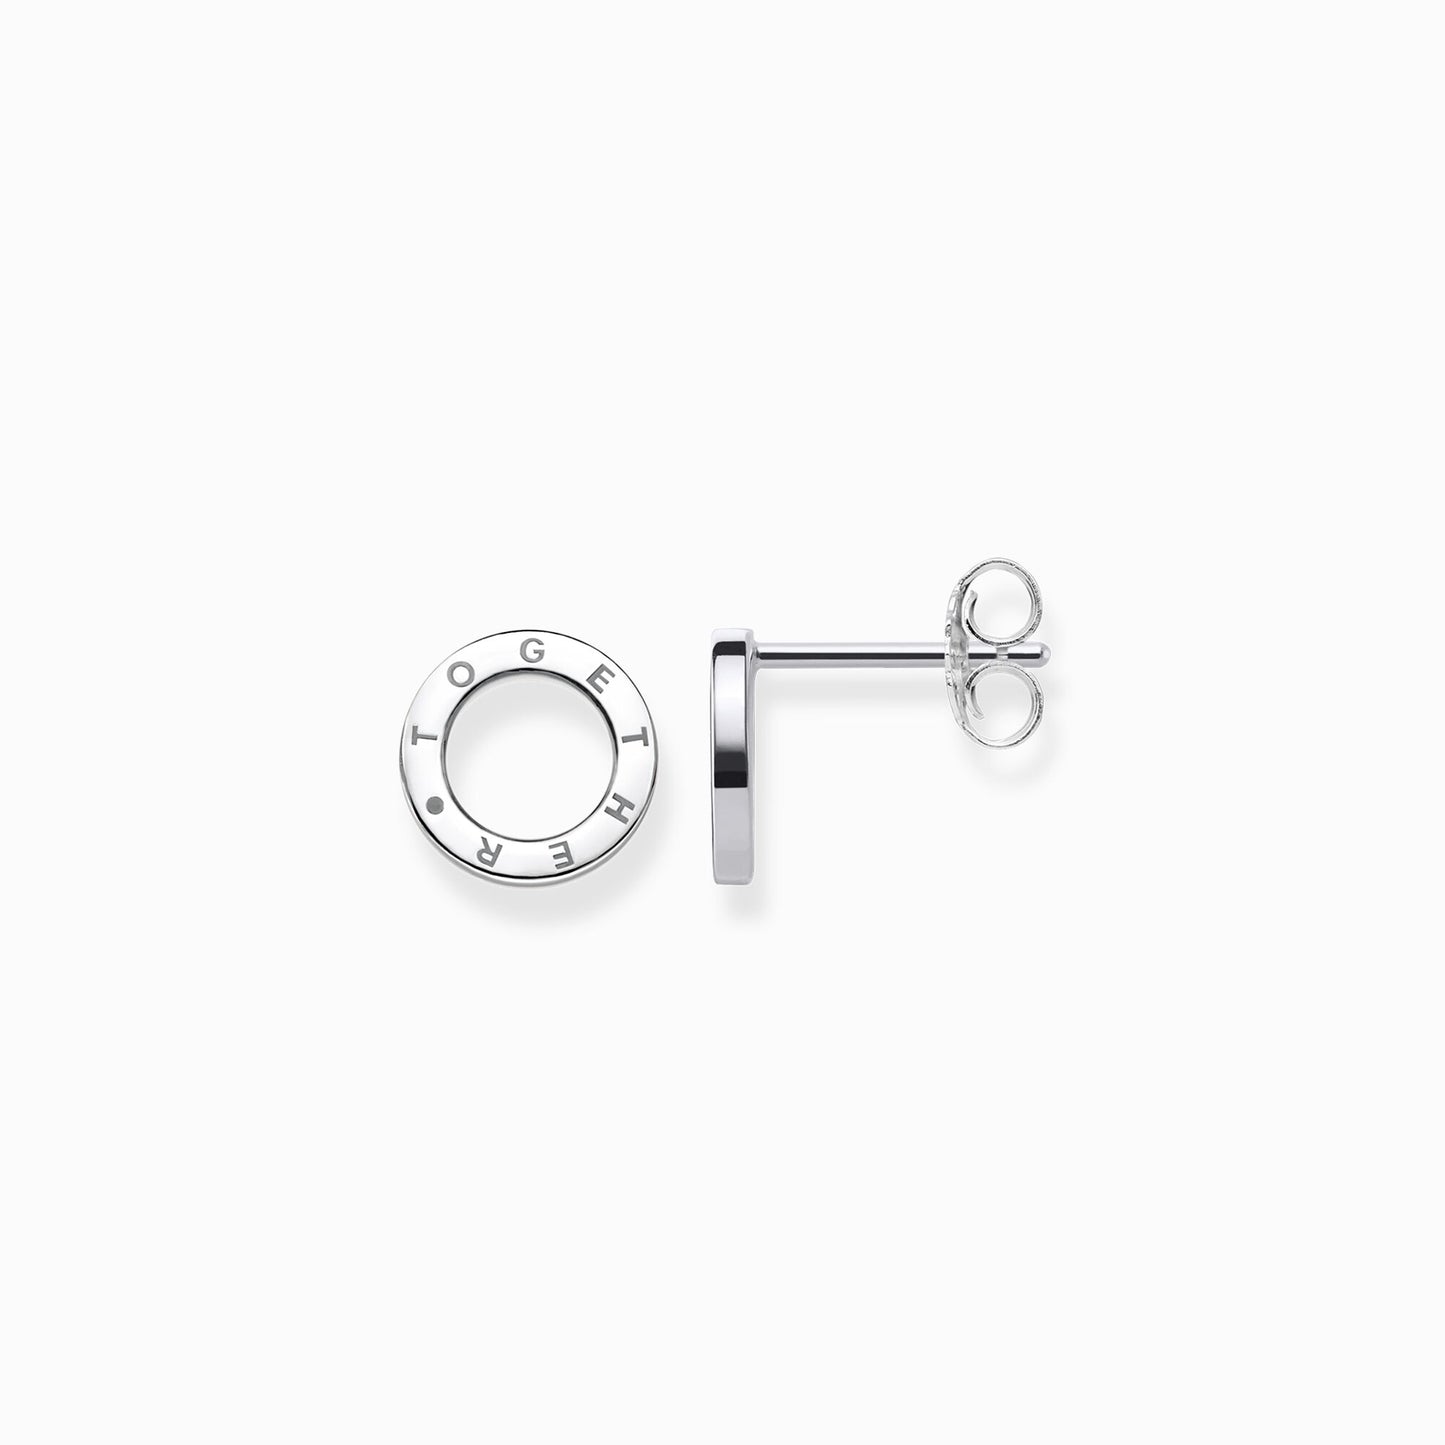 Thomas Sabo Sterling Silver Together Circle Stud Earrings H1946-001-12